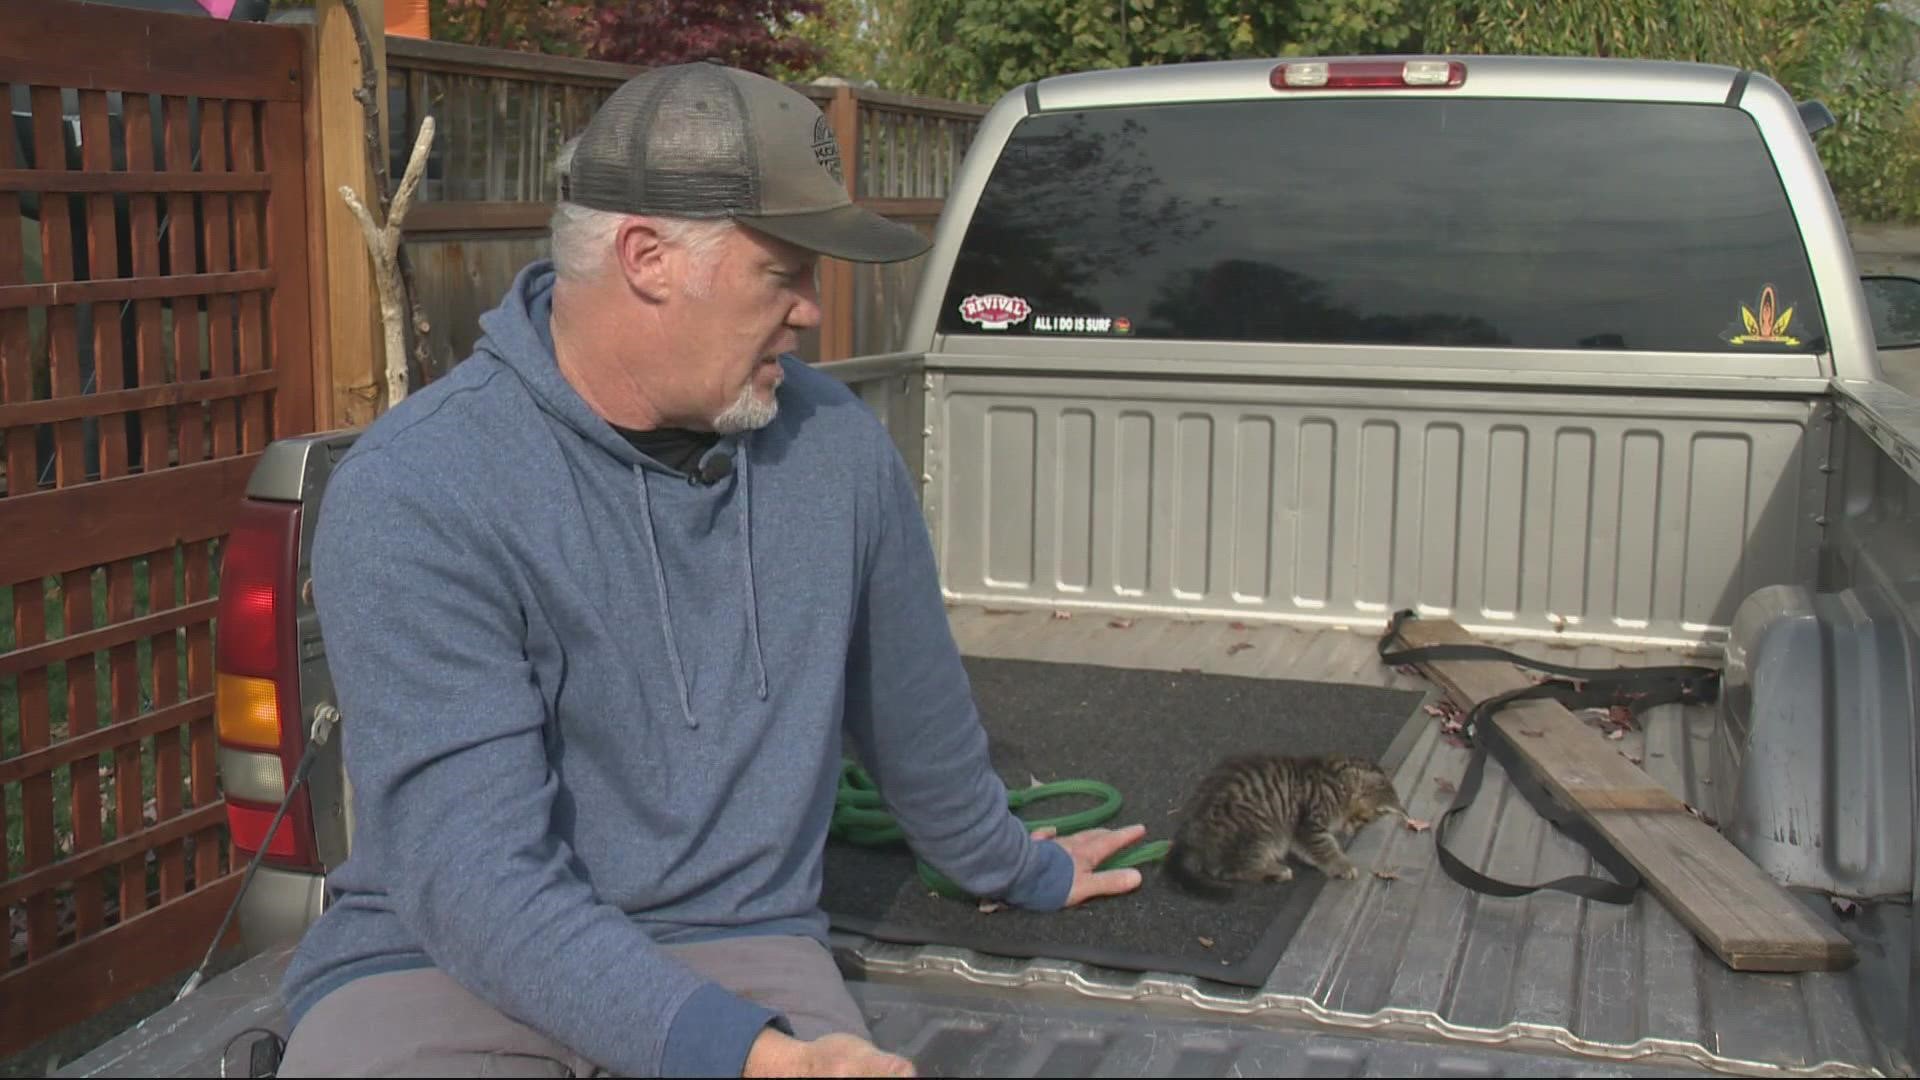 In 2018, Chuck Hawley rescued a kitten that was glued to a Salem road. He named the kitten Sticky and used the experience to teach kids about kindness.